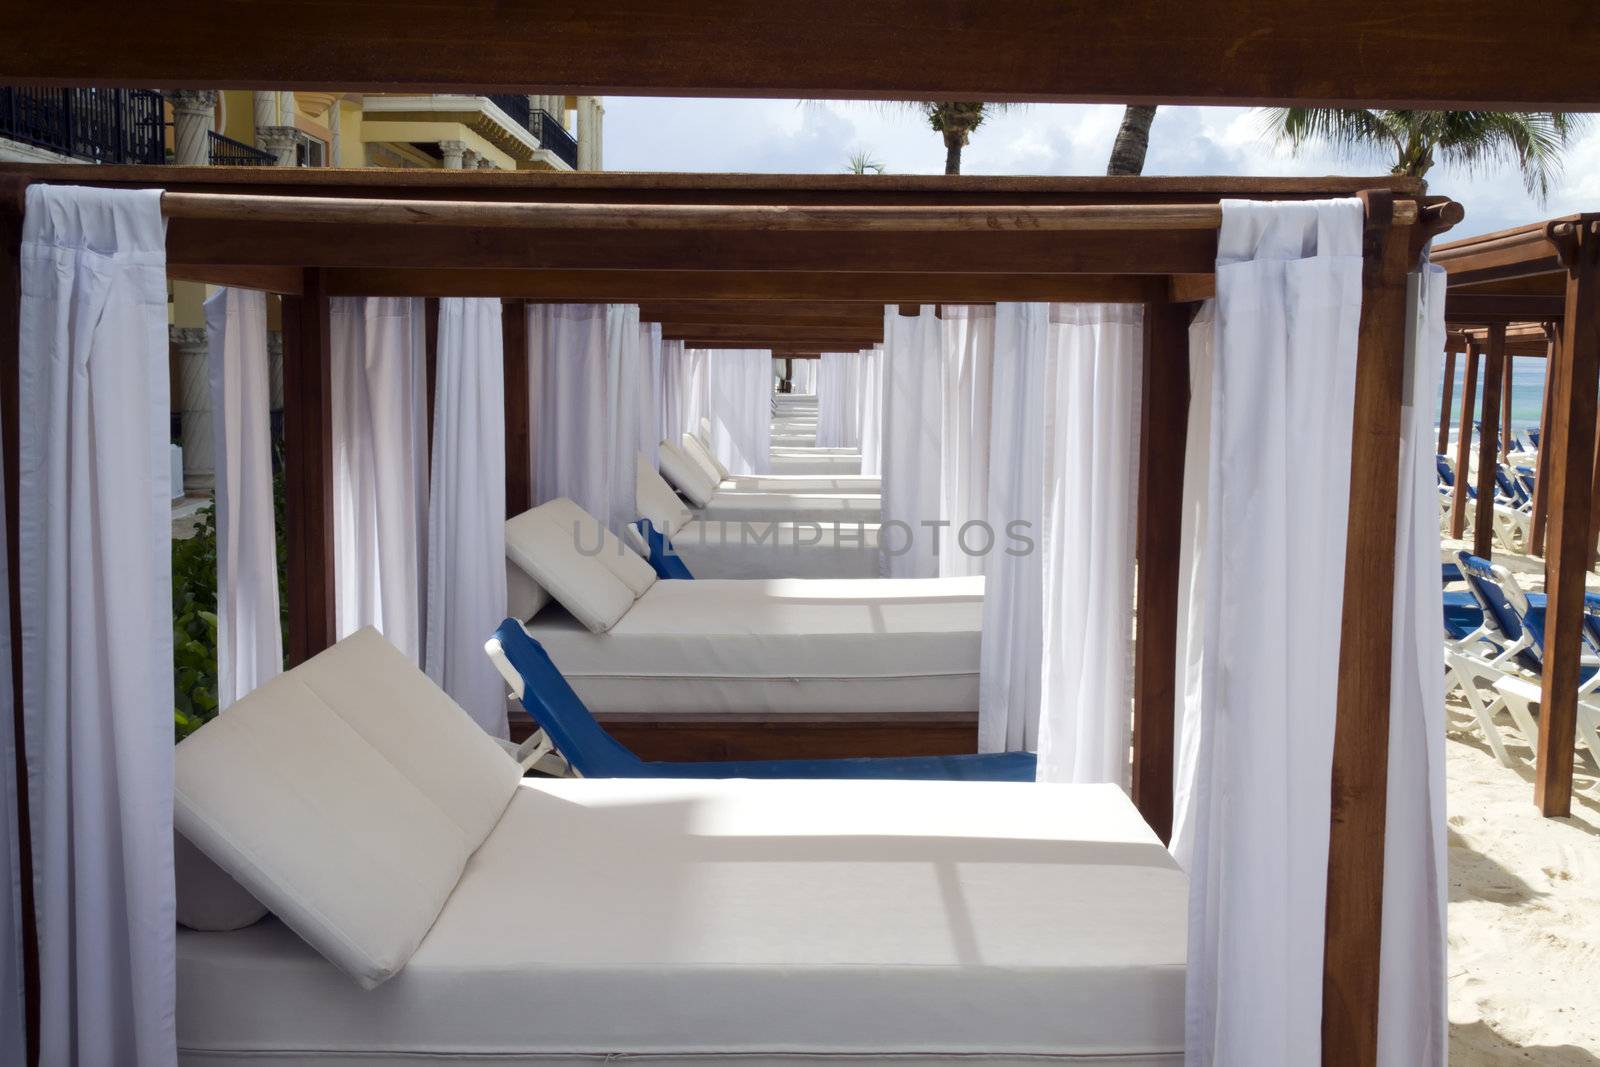 A luxury day bed located on the beach